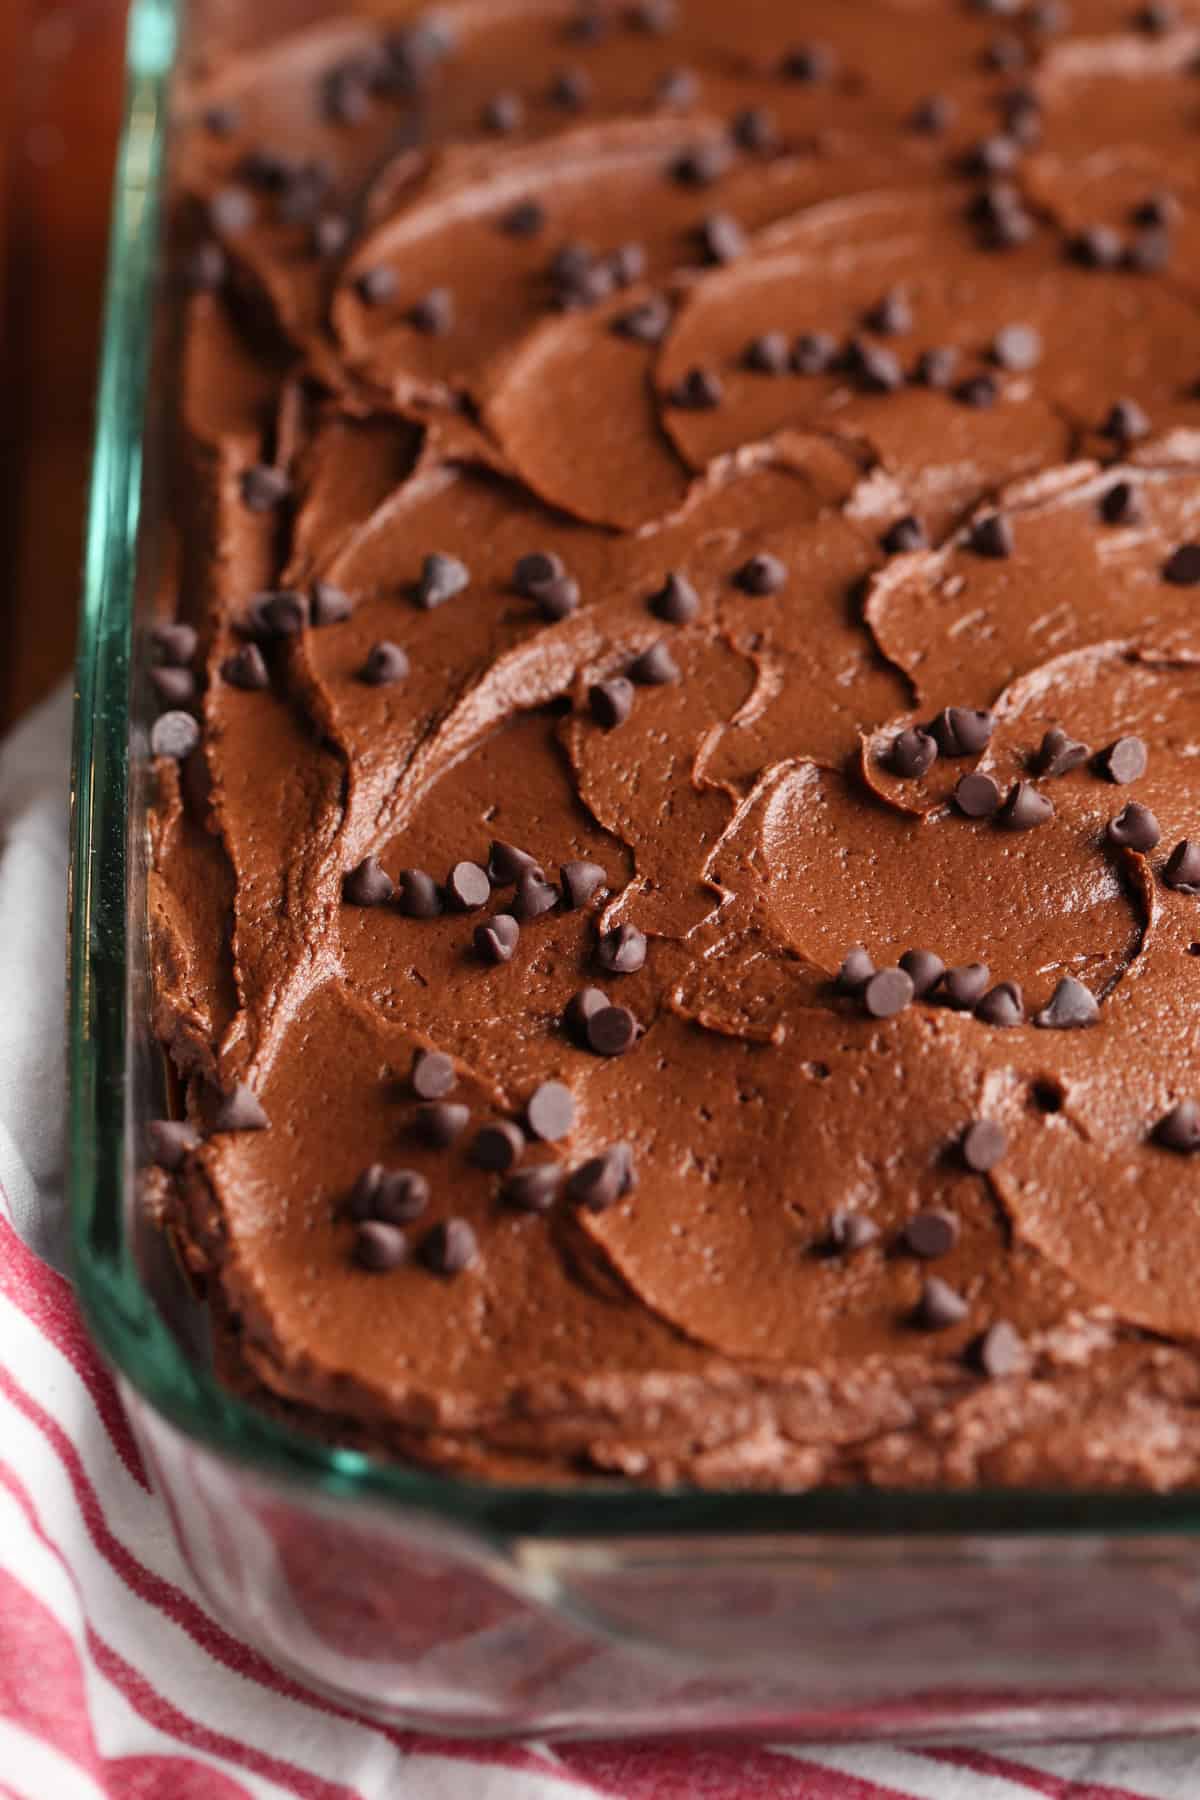 Chocolate Cake with frosting and chocolate chips